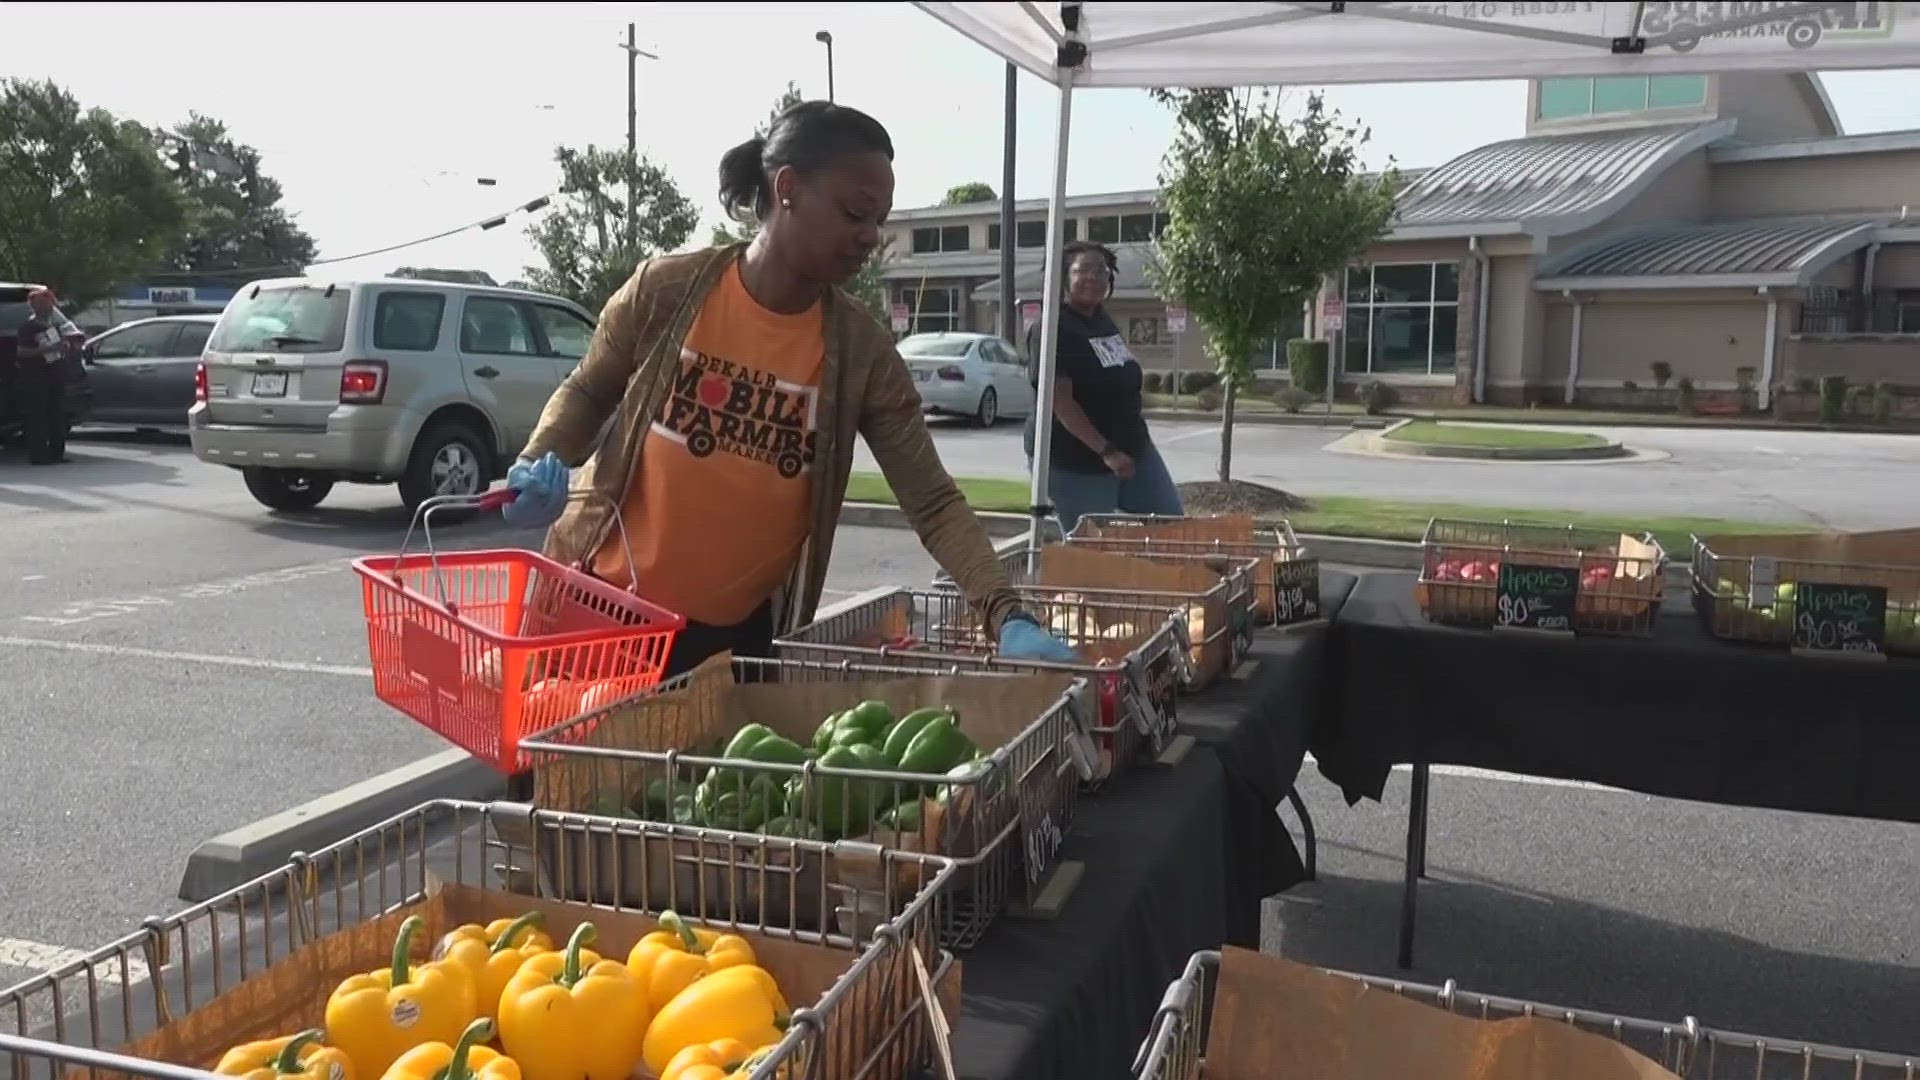 That means fruits and veggies are available to residents in DeKalb County at low prices.